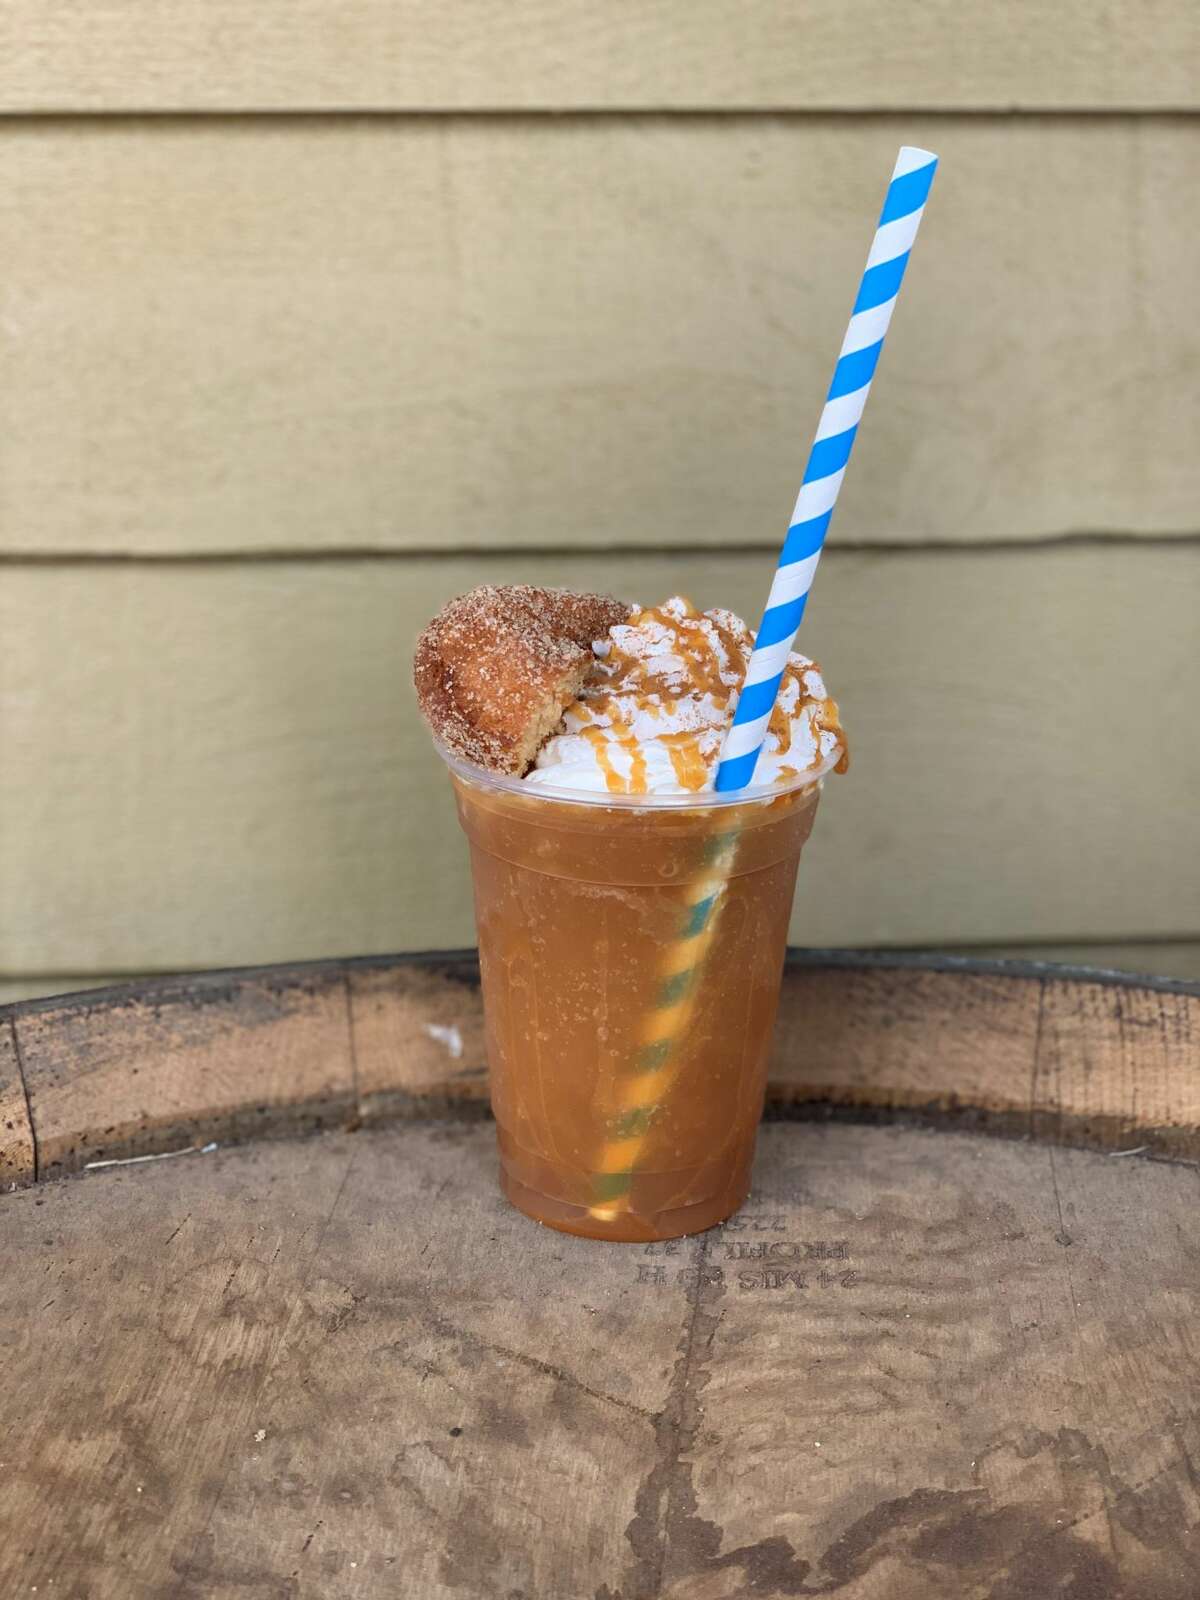 The apple cider frappe slushie, garnished with a piece of cider doughnut, from Windy Hill Orchard.